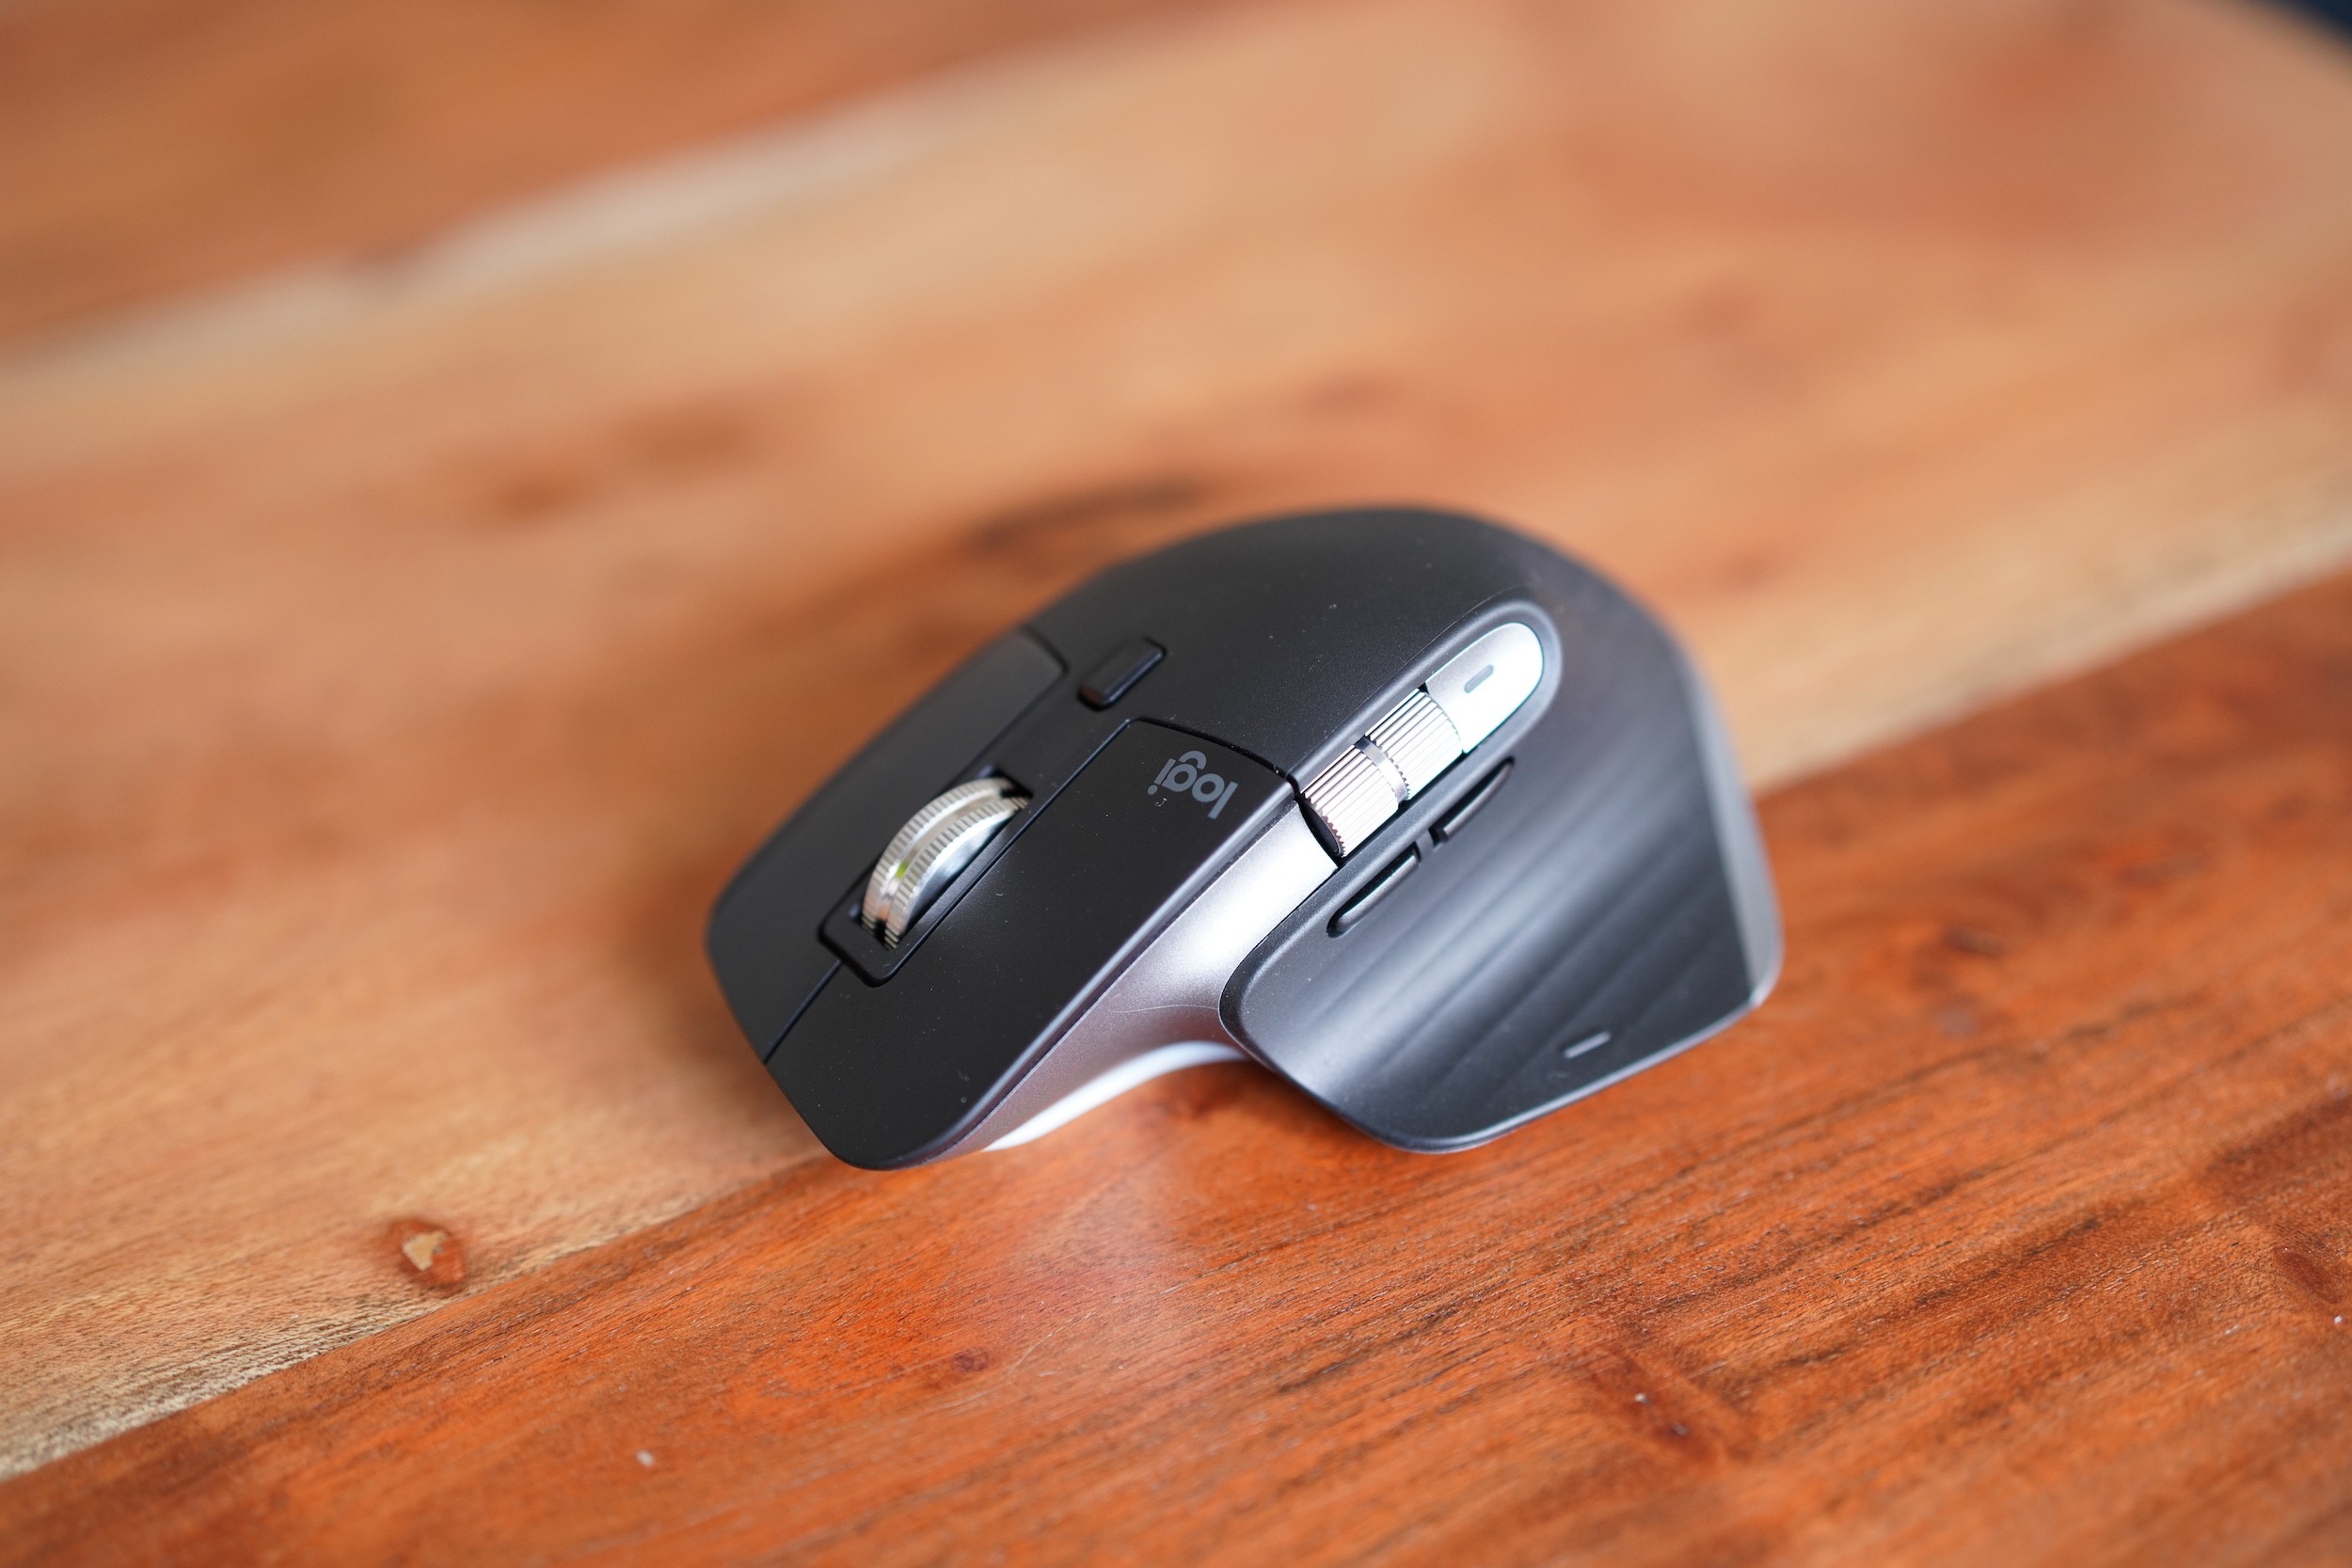 Logitech’s new Mac-specific mouse and keyboards are the new best choices for Mac input devices